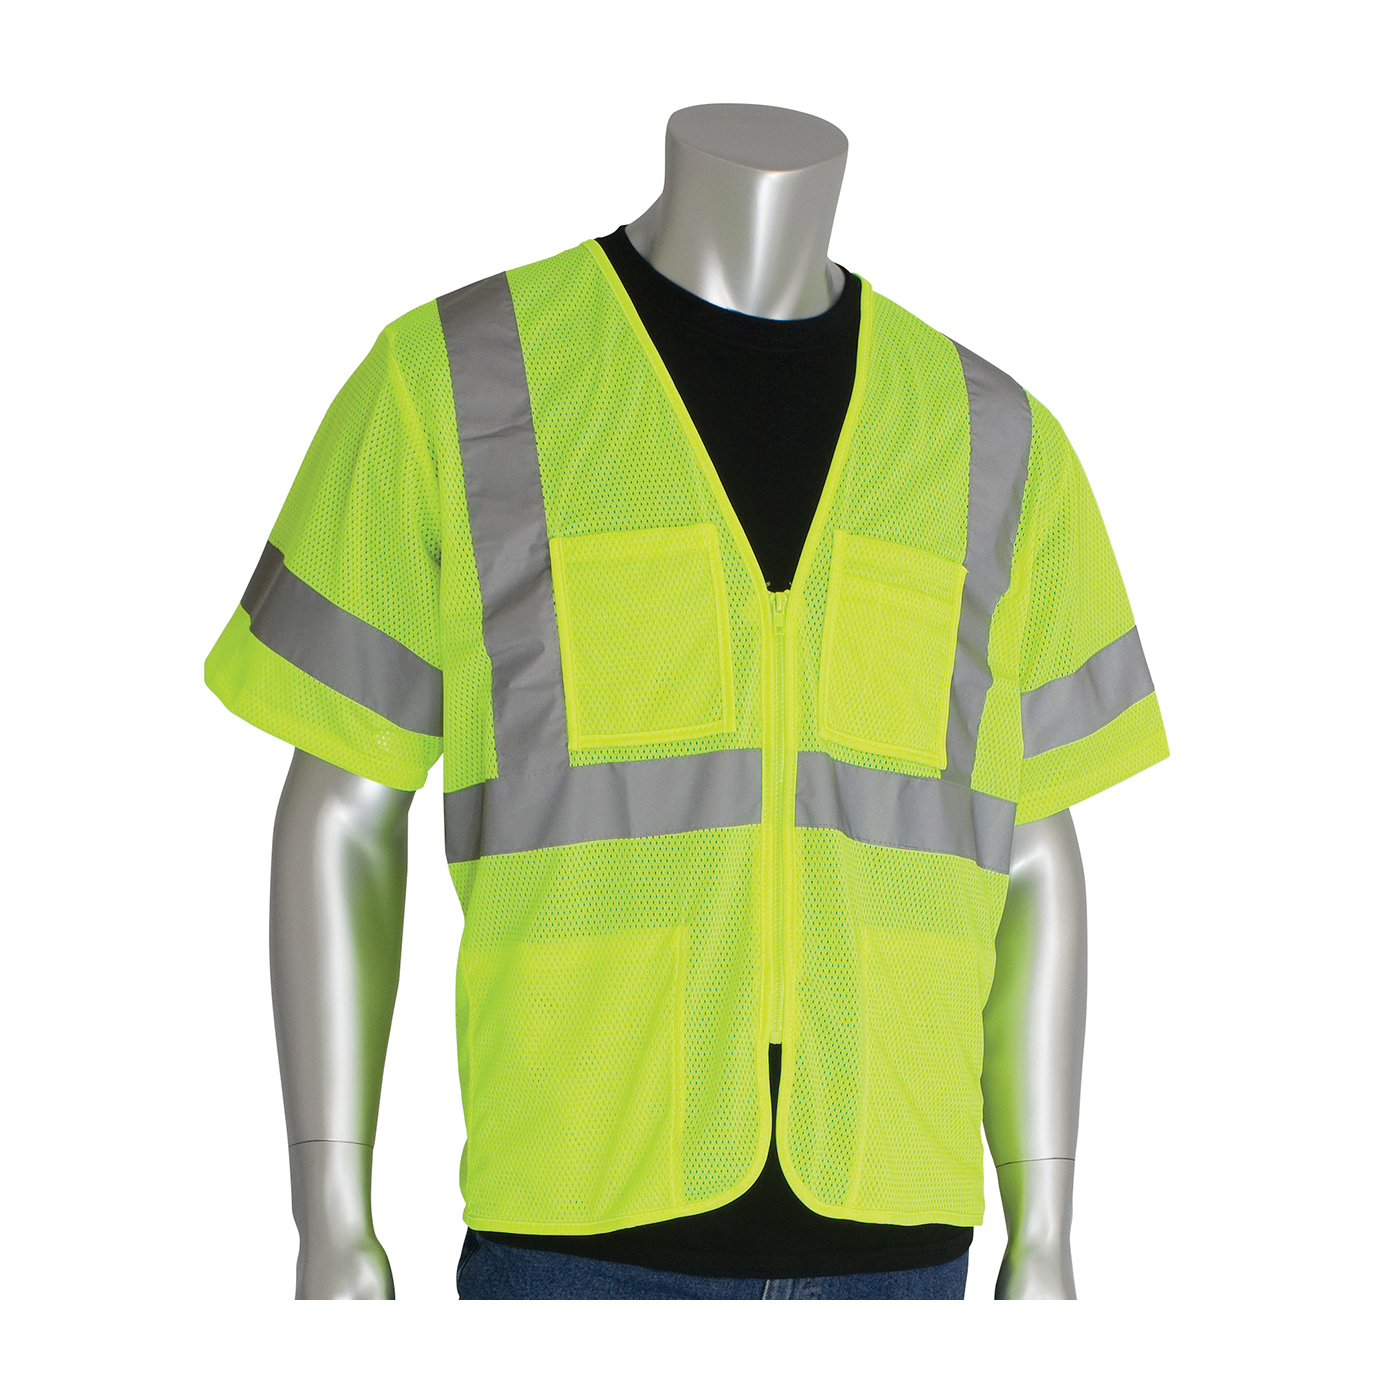 PIP® 303-MVGZ4P-LY/5X Safety Vest, 5XL, Hi-Viz Lime Yellow, Polyester Mesh, Zipper Closure, 4 Pockets, ANSI Class: Class 3, Specifications Met: ANSI 107 Type R